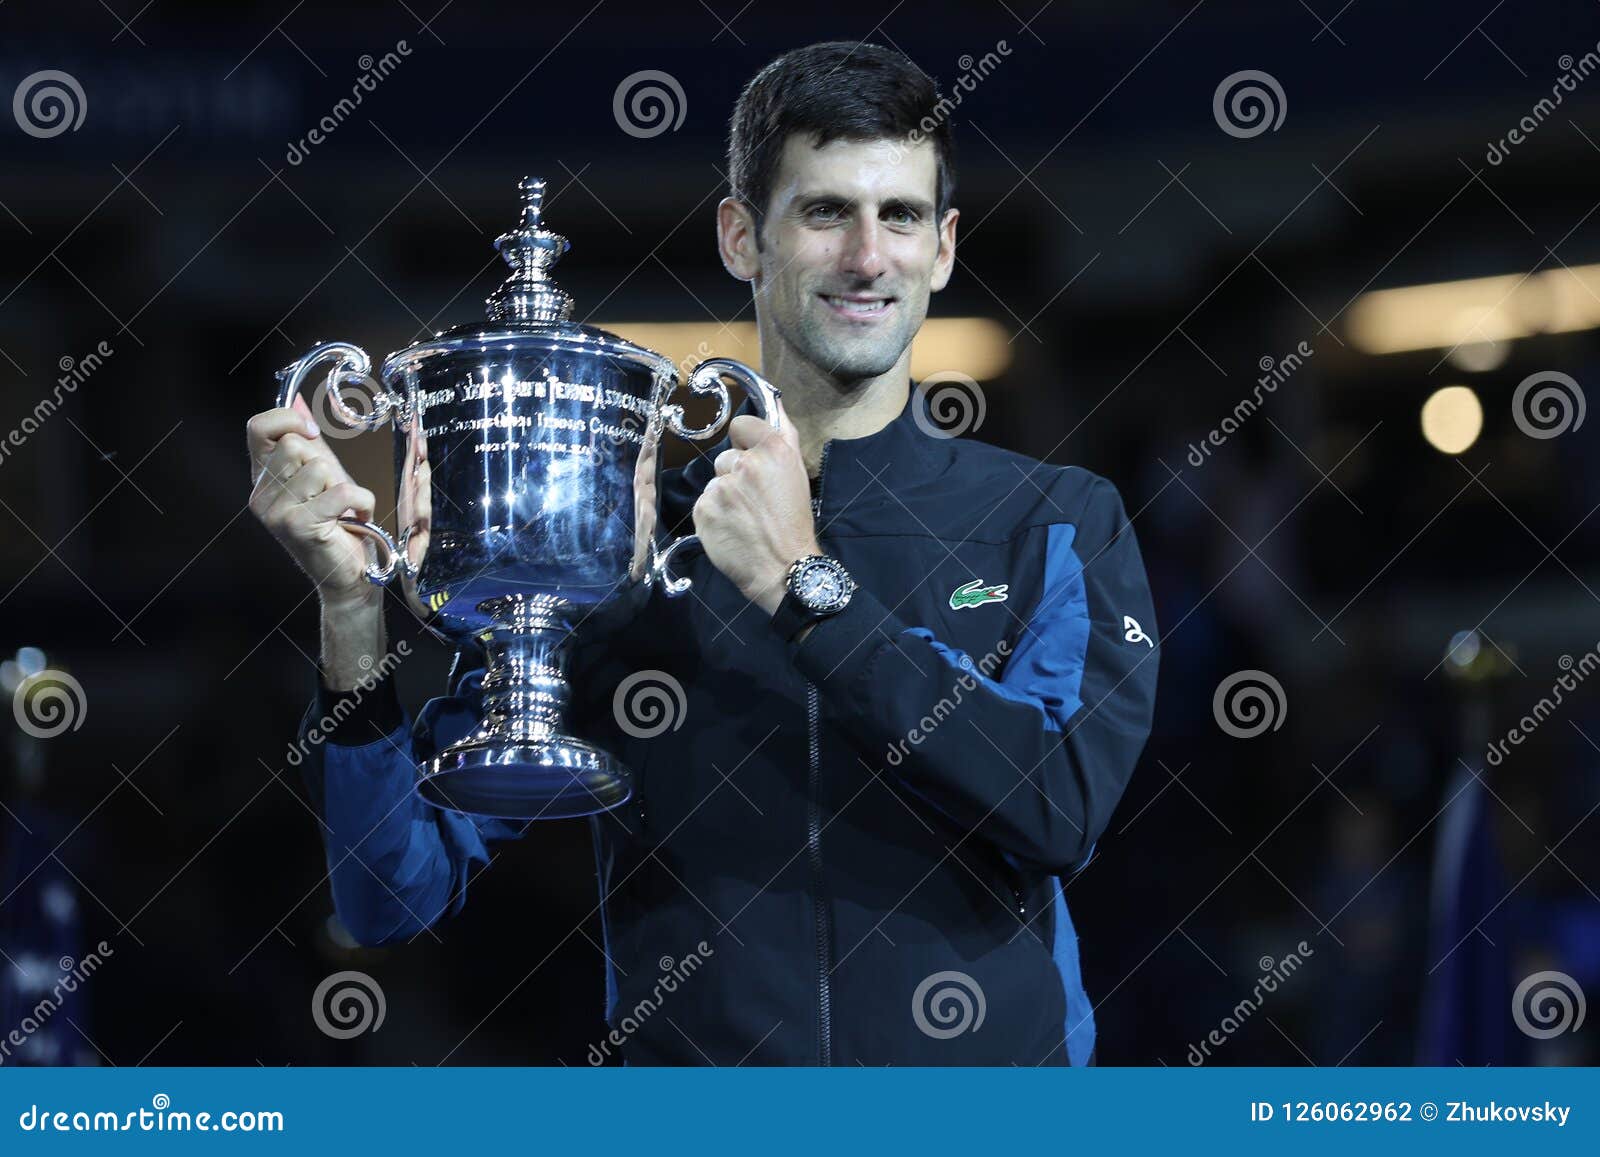 2018 Us Open Champion Novak Djokovic Of Serbia Posing With Us Open Trophy During Trophy Presentation After His Final Match Victory Editorial Photography Image Of Flushing Champion 126062962